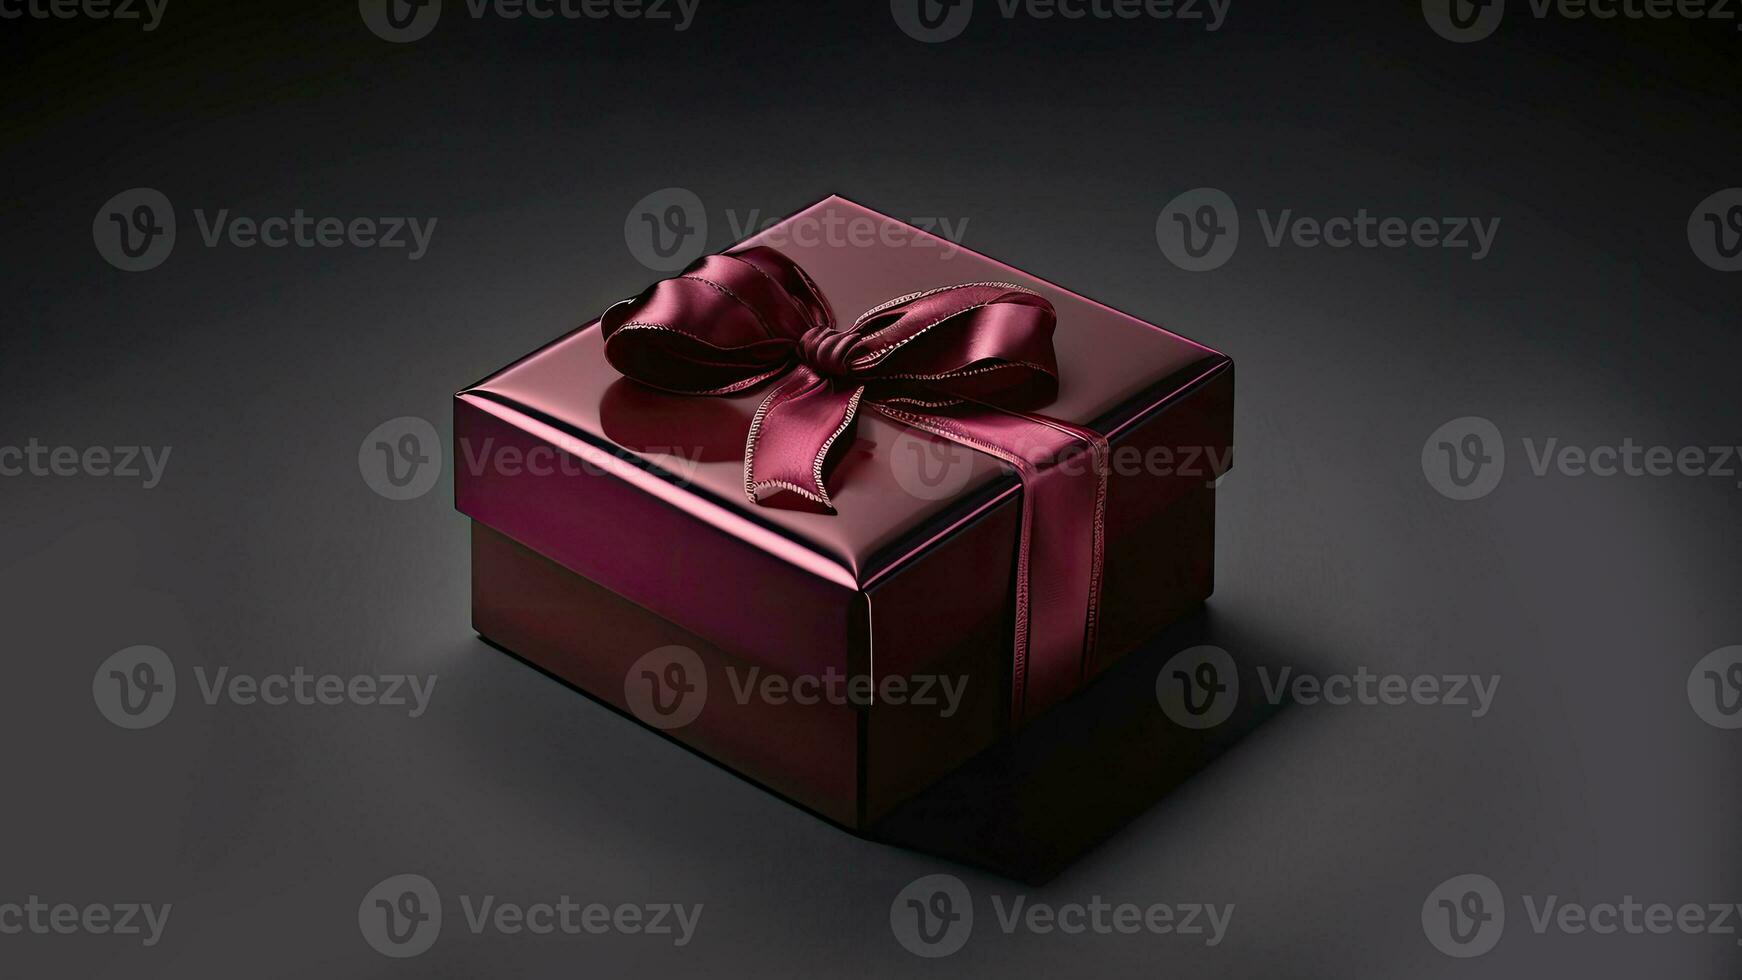 3D Render of Shiny Matte Red Gift Box With Silk Bow Ribbon On Black Background And Copy Space. photo